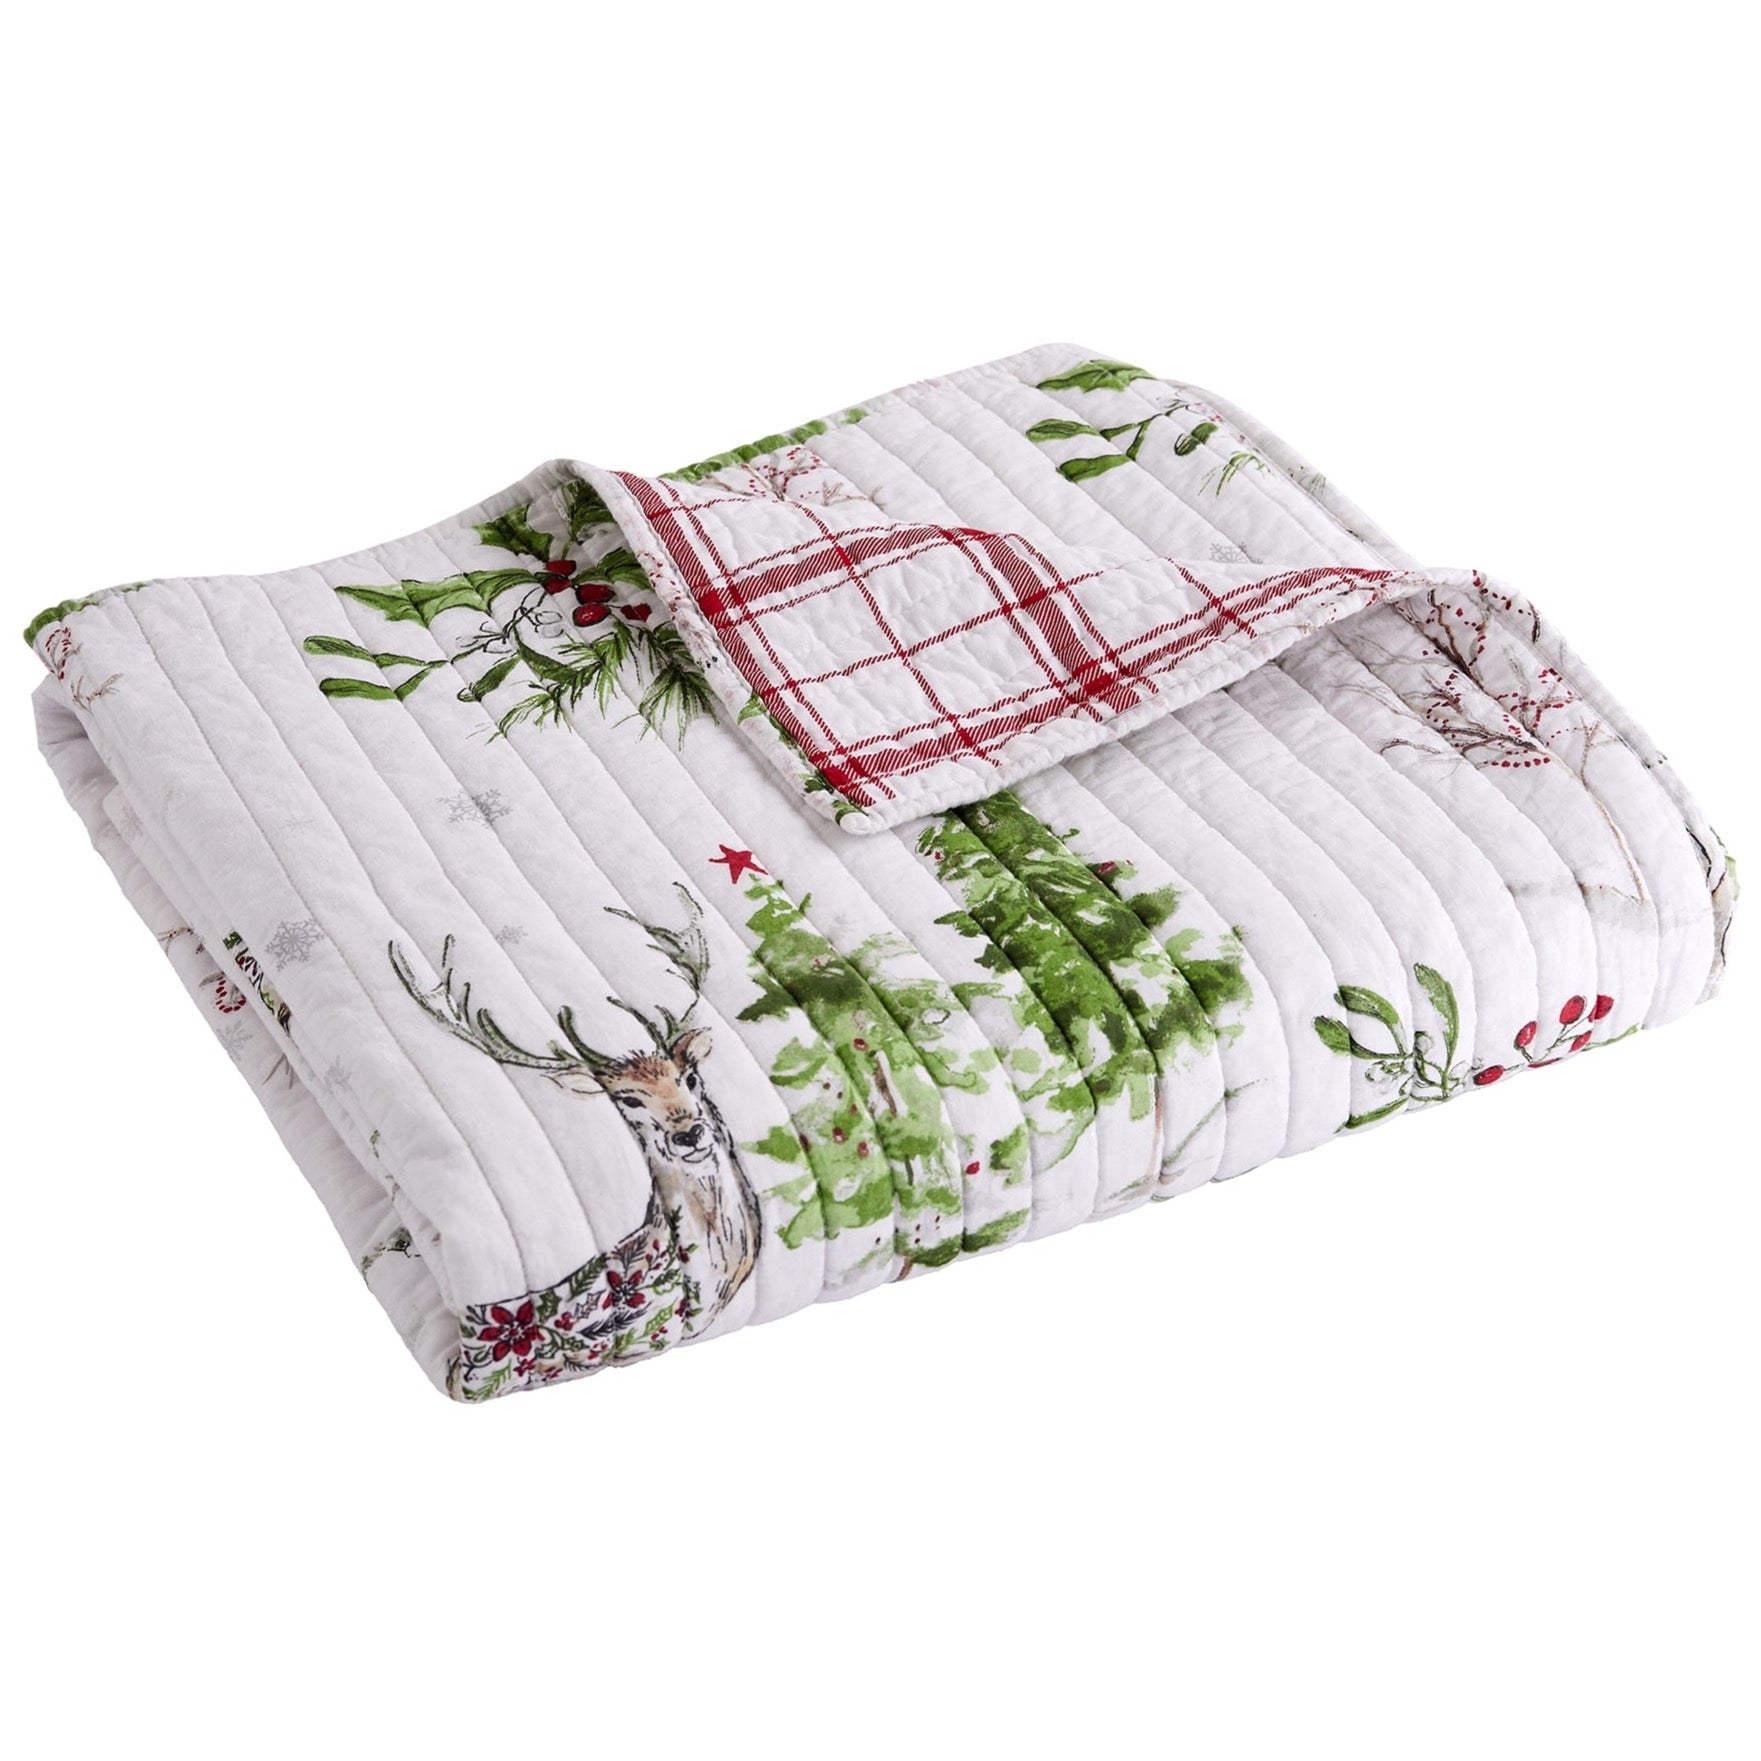 Sleigh Bells Quilted Throw